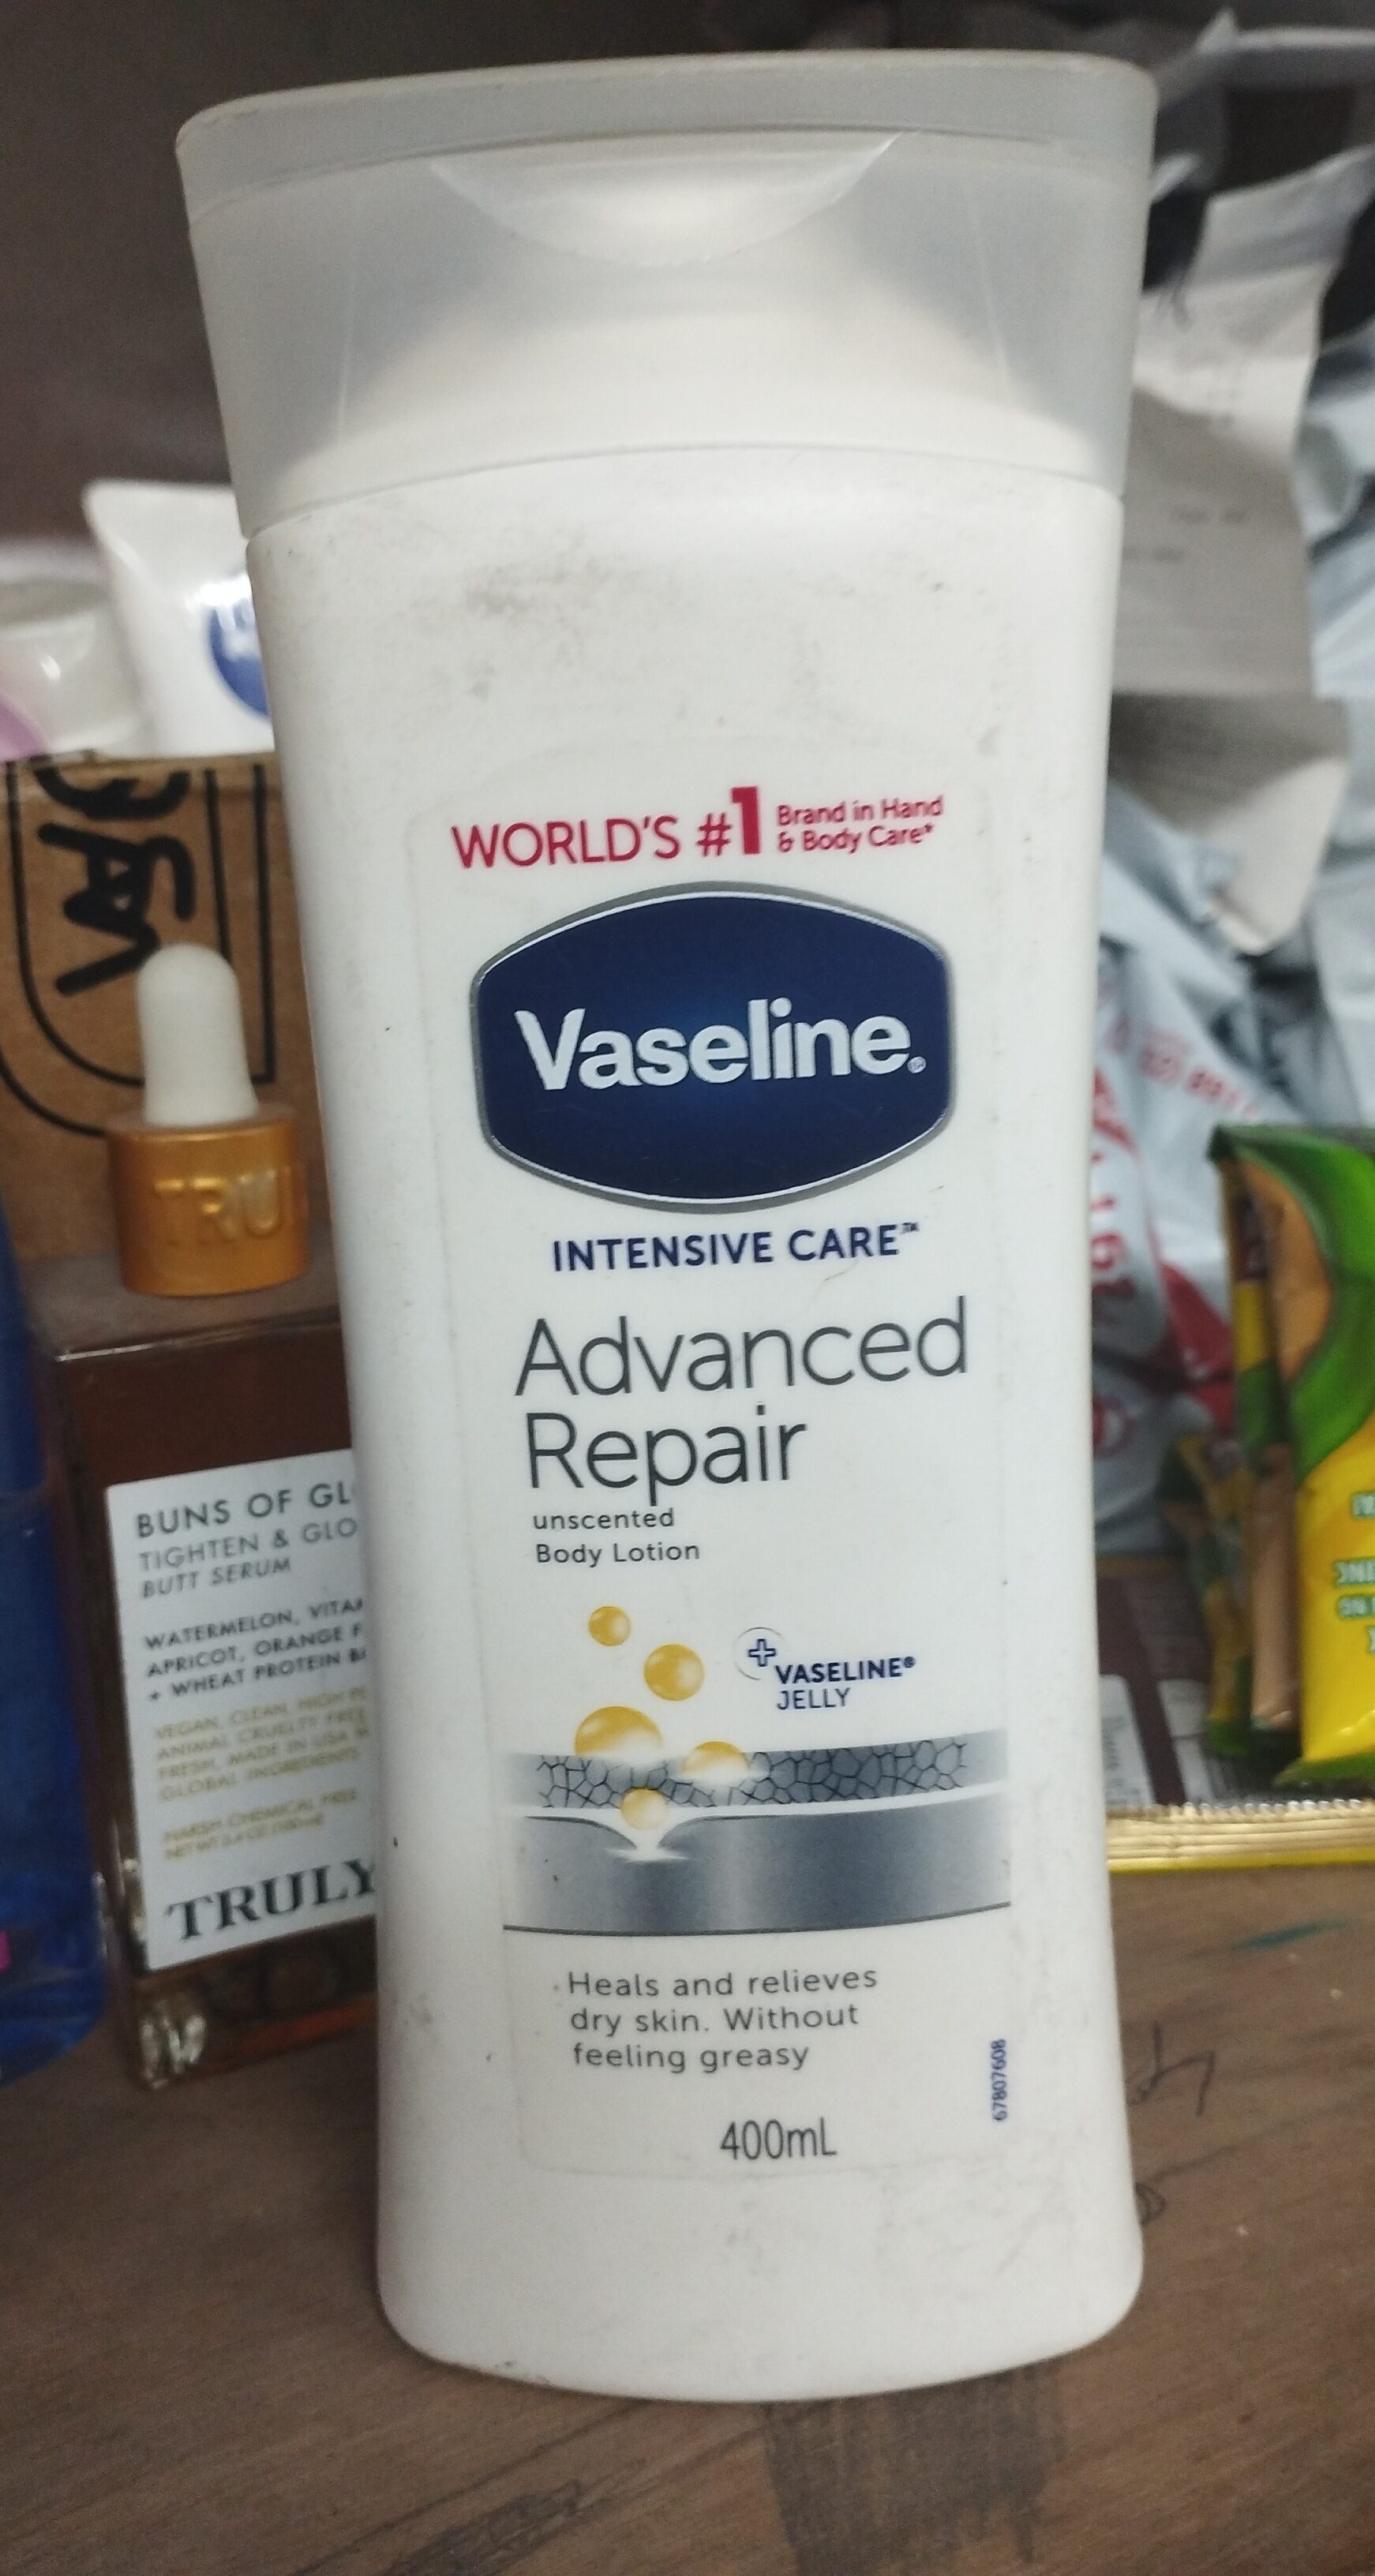 Vaseline Intensive Care Advanced Repair Fragrance Free - Product